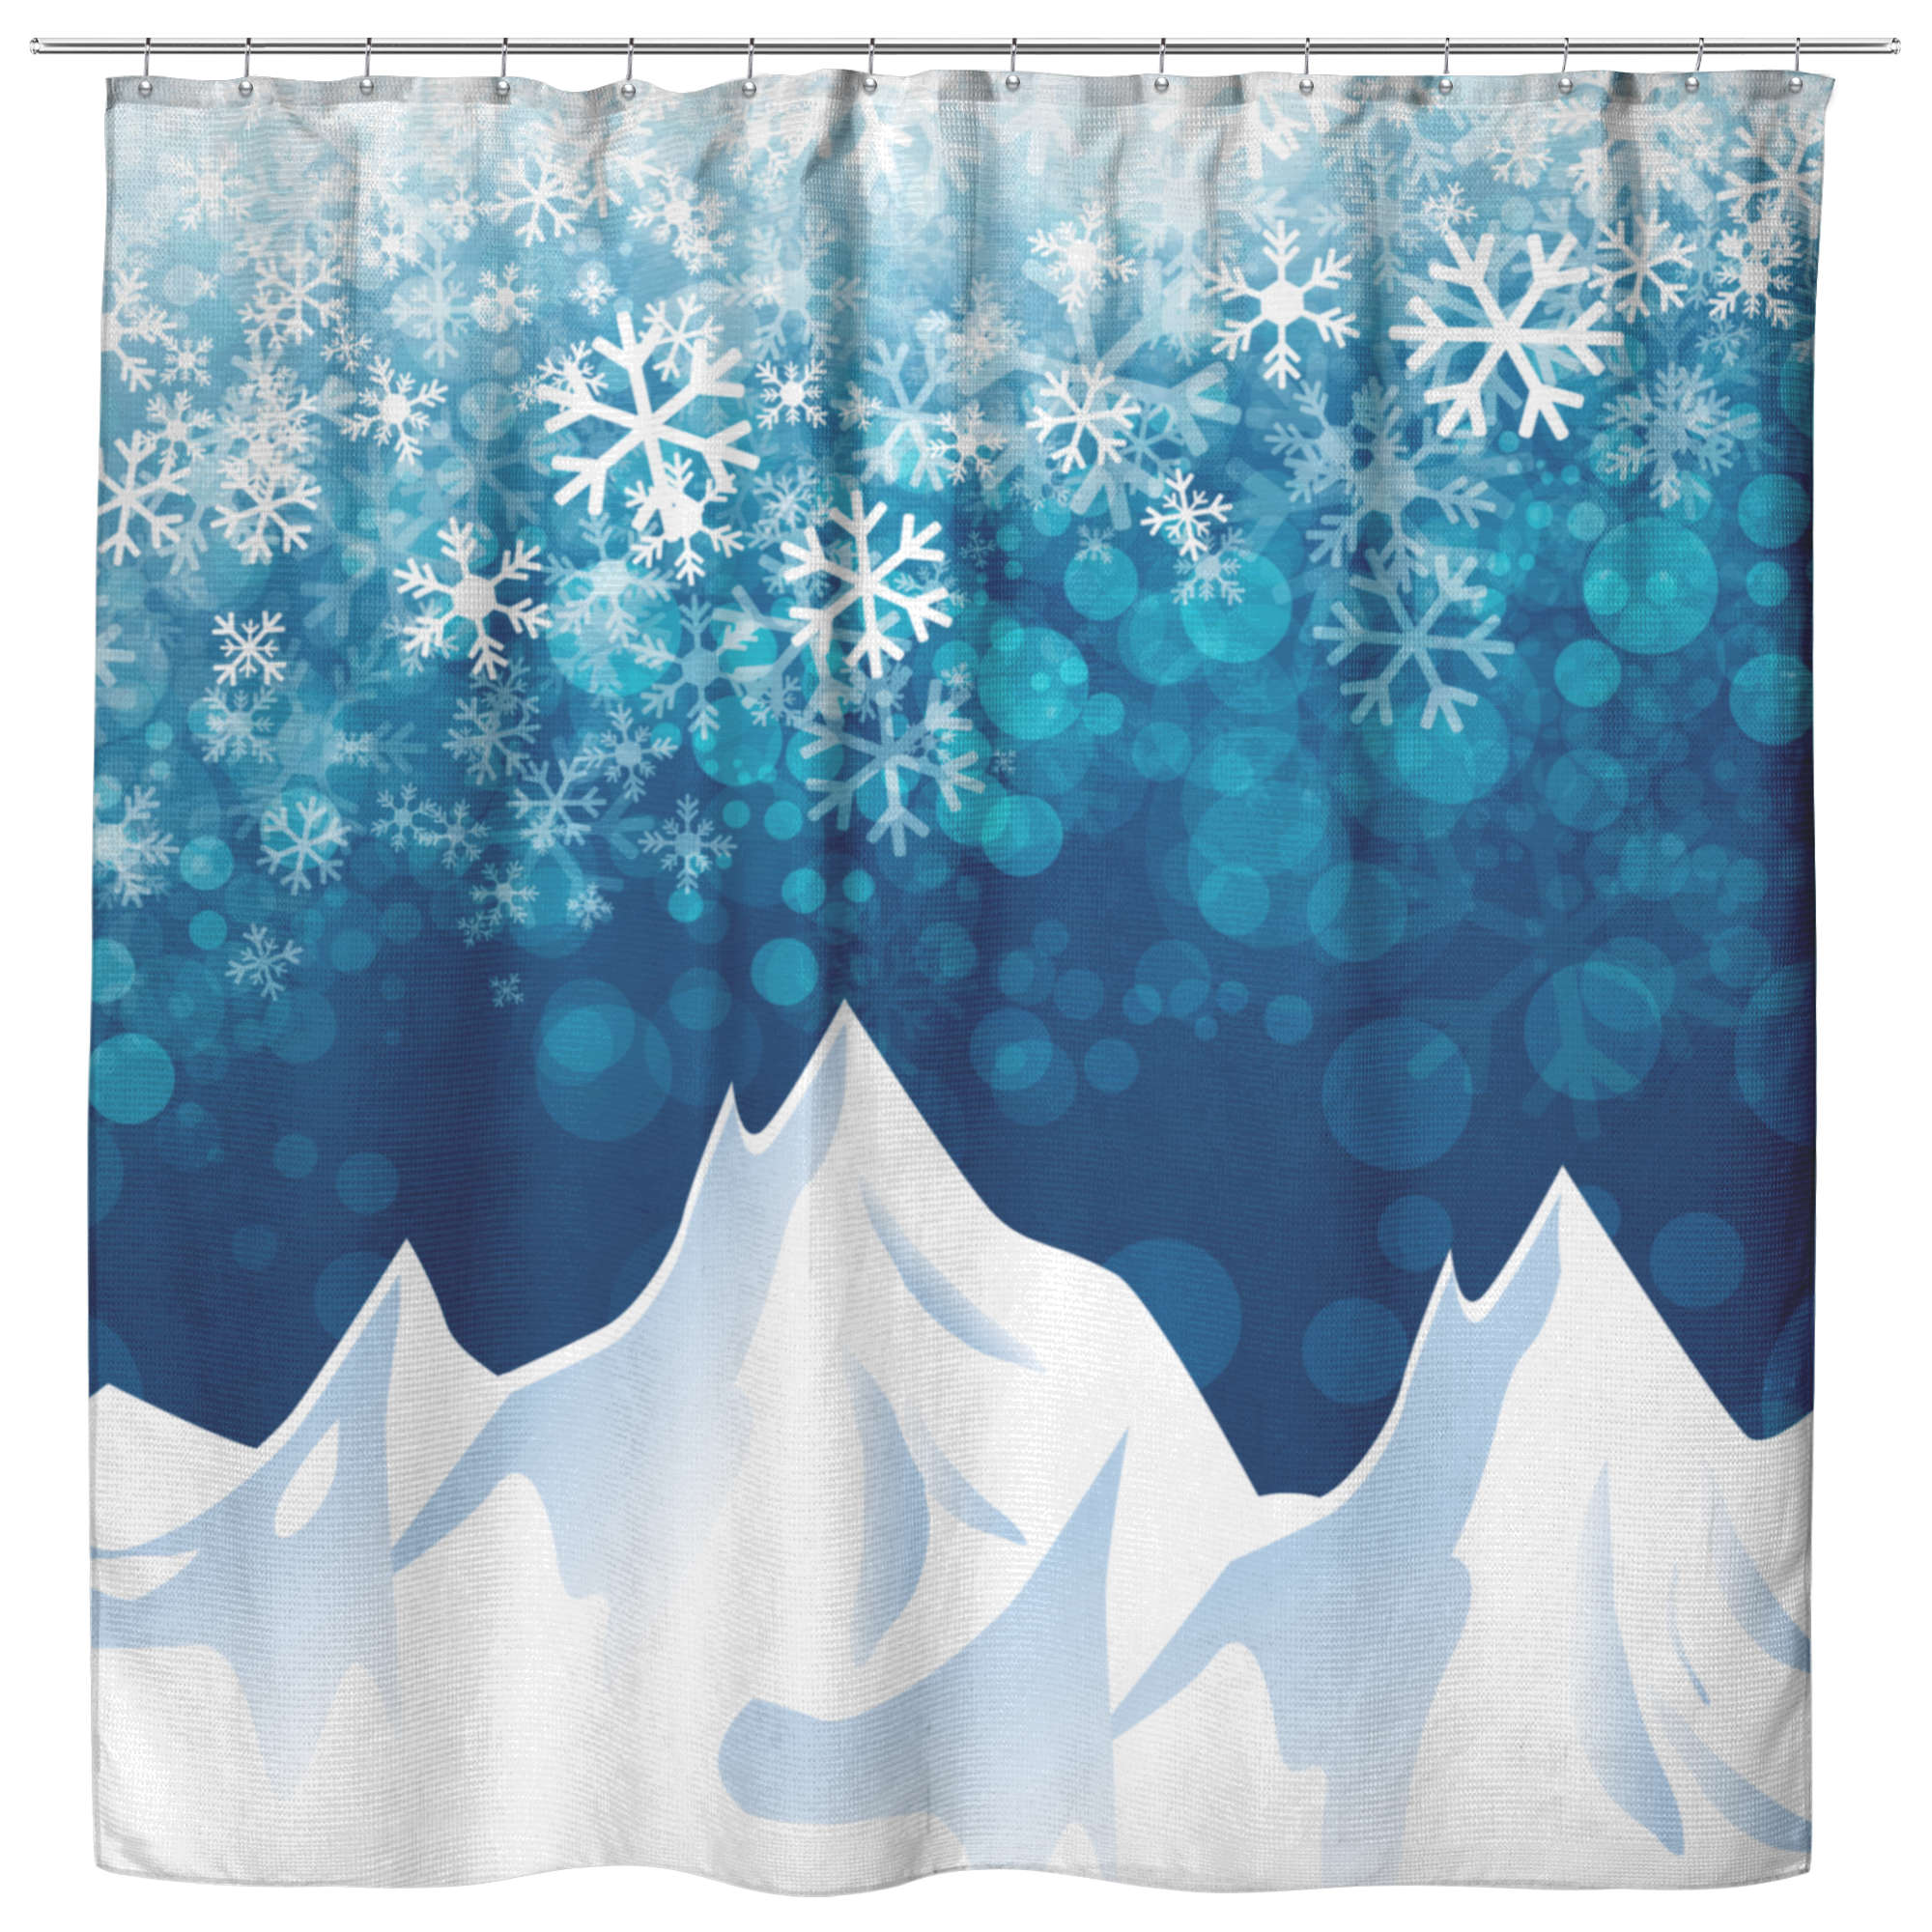 Snow Fall Over The Mountains Shower Curtains - Powderaddicts